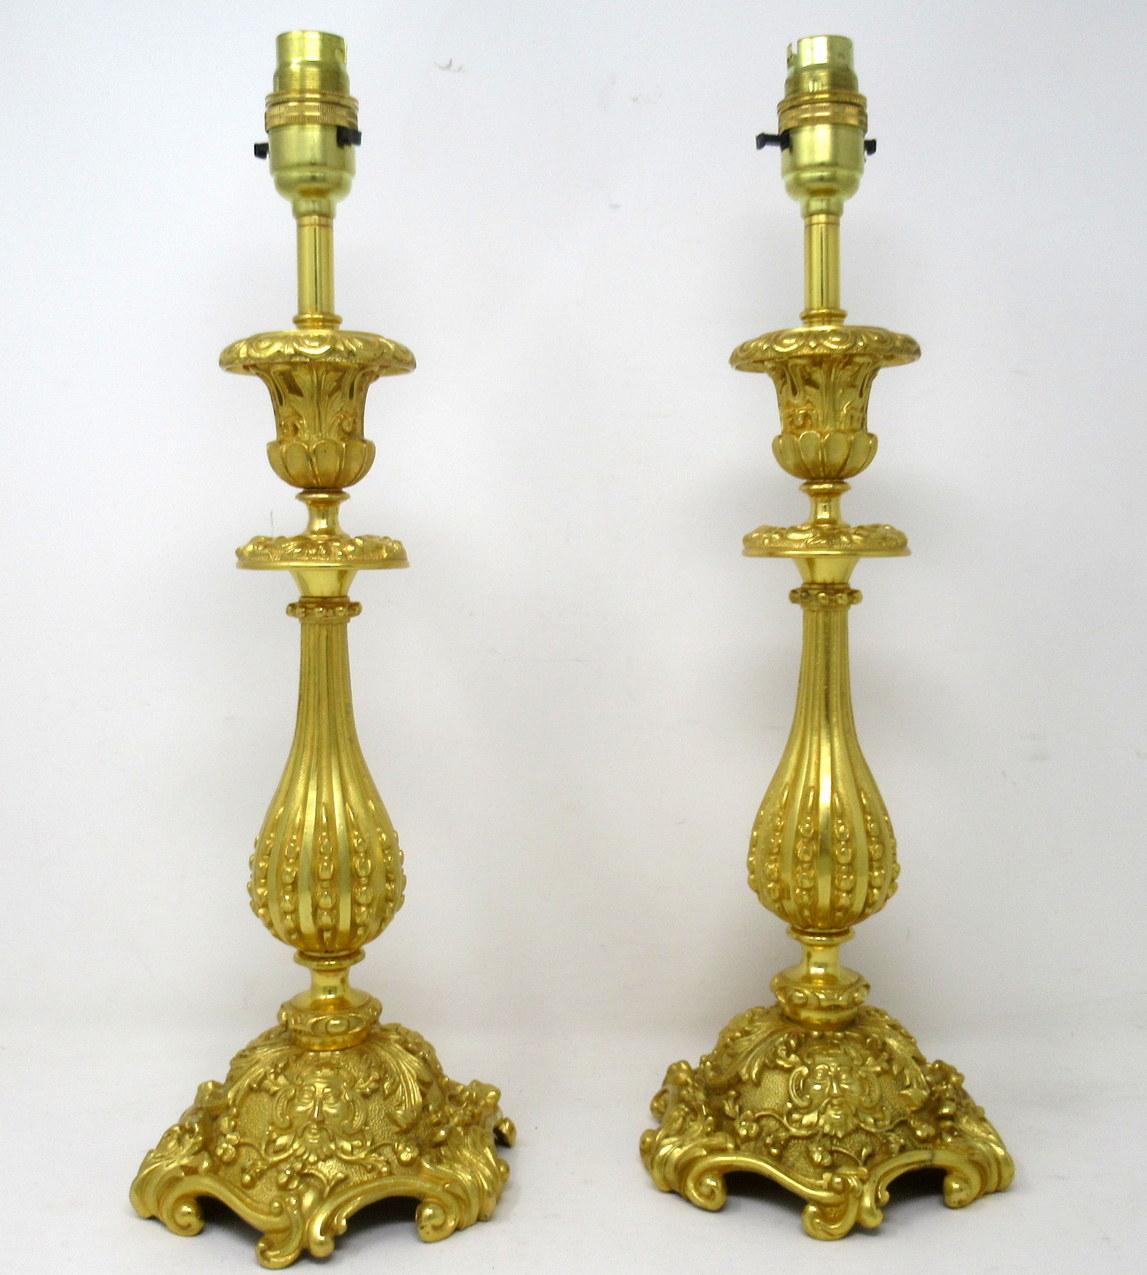 An Exceptionally fine pair french ormolu early Victorian single light candlesticks of generous proportions and outstanding chisel cast quality, now converted to a stunning pair of electric table lamps, offered in exceptional condition, each with